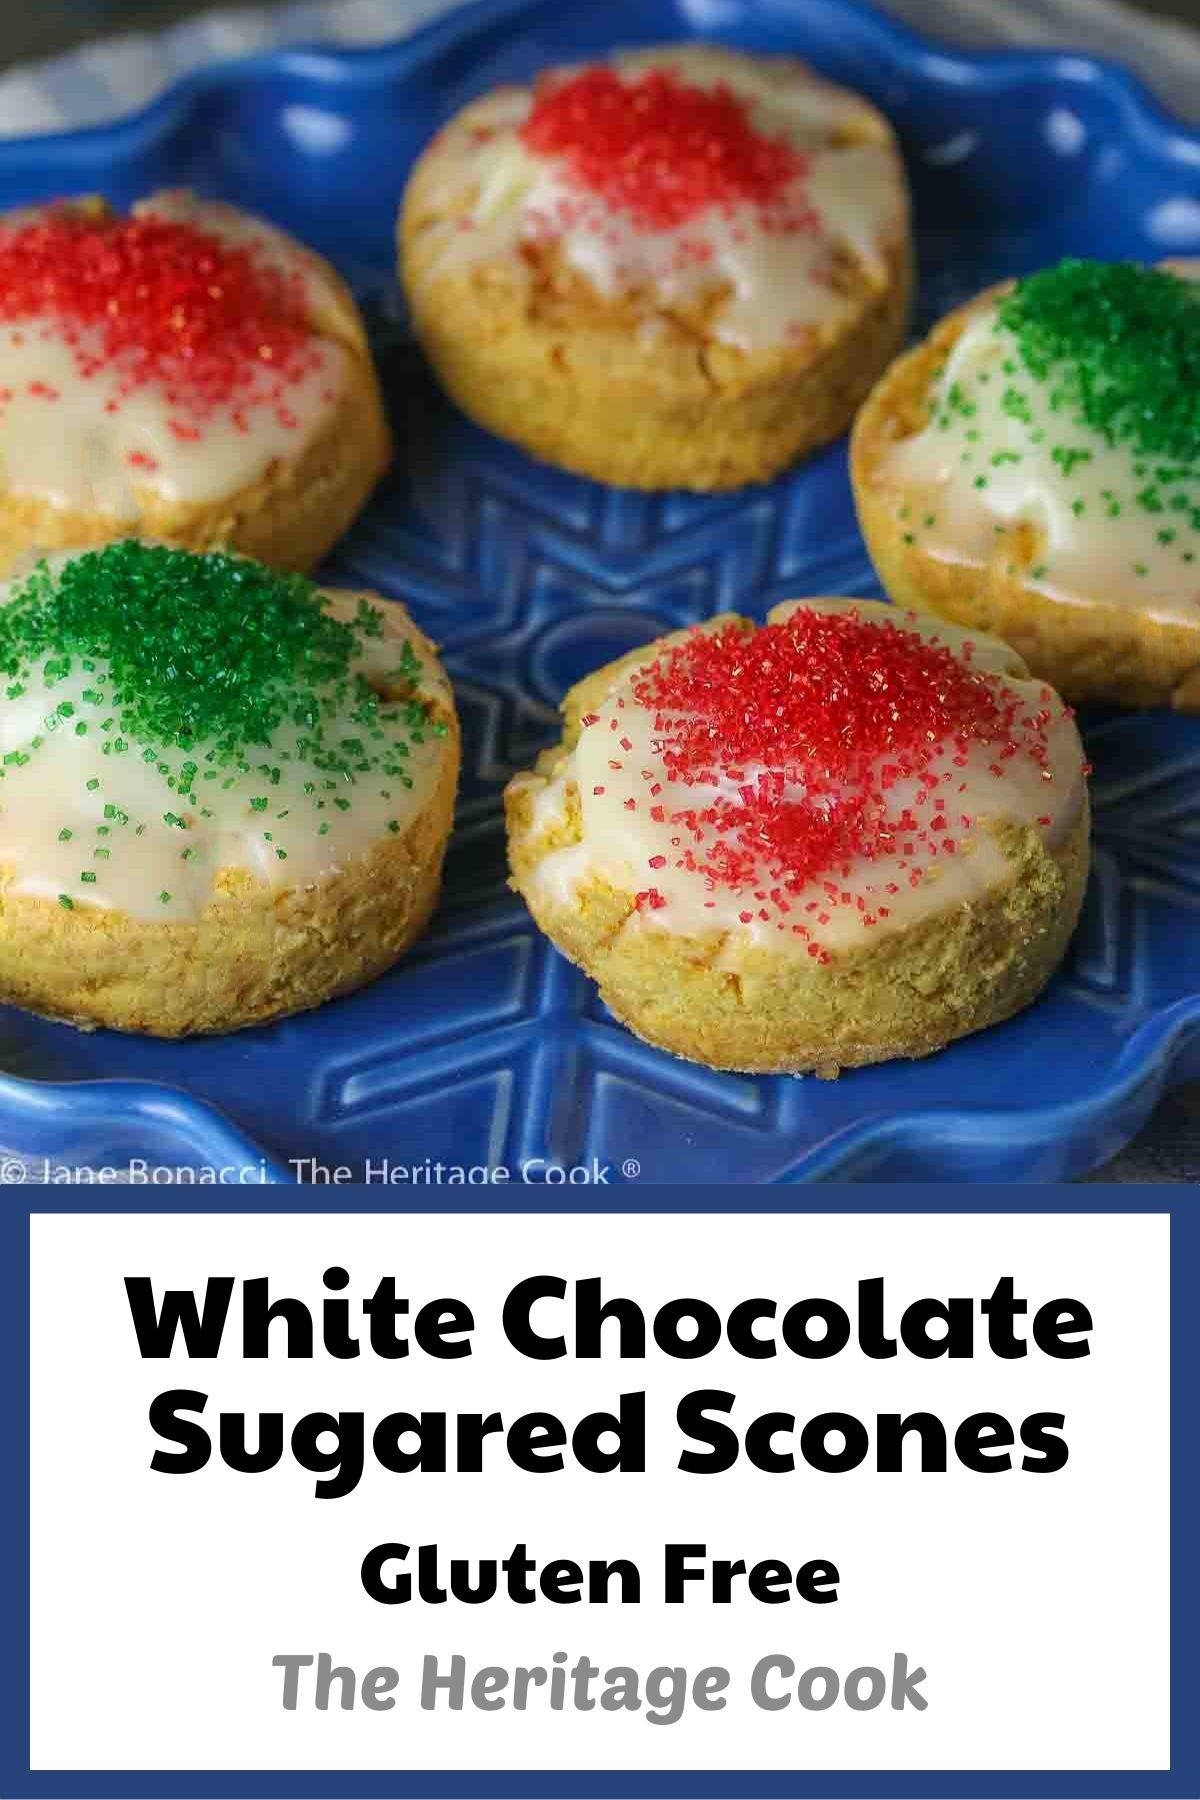 Five White Chocolate Sugared Scones with white chocolate glaze and sprinkled with red and green sugars, served on a blue star-shaped plate on top of a blue and white striped cloth, in front of festive hand-carved snowmen figures © 2023 Jane Bonacci, The Heritage Cook. 